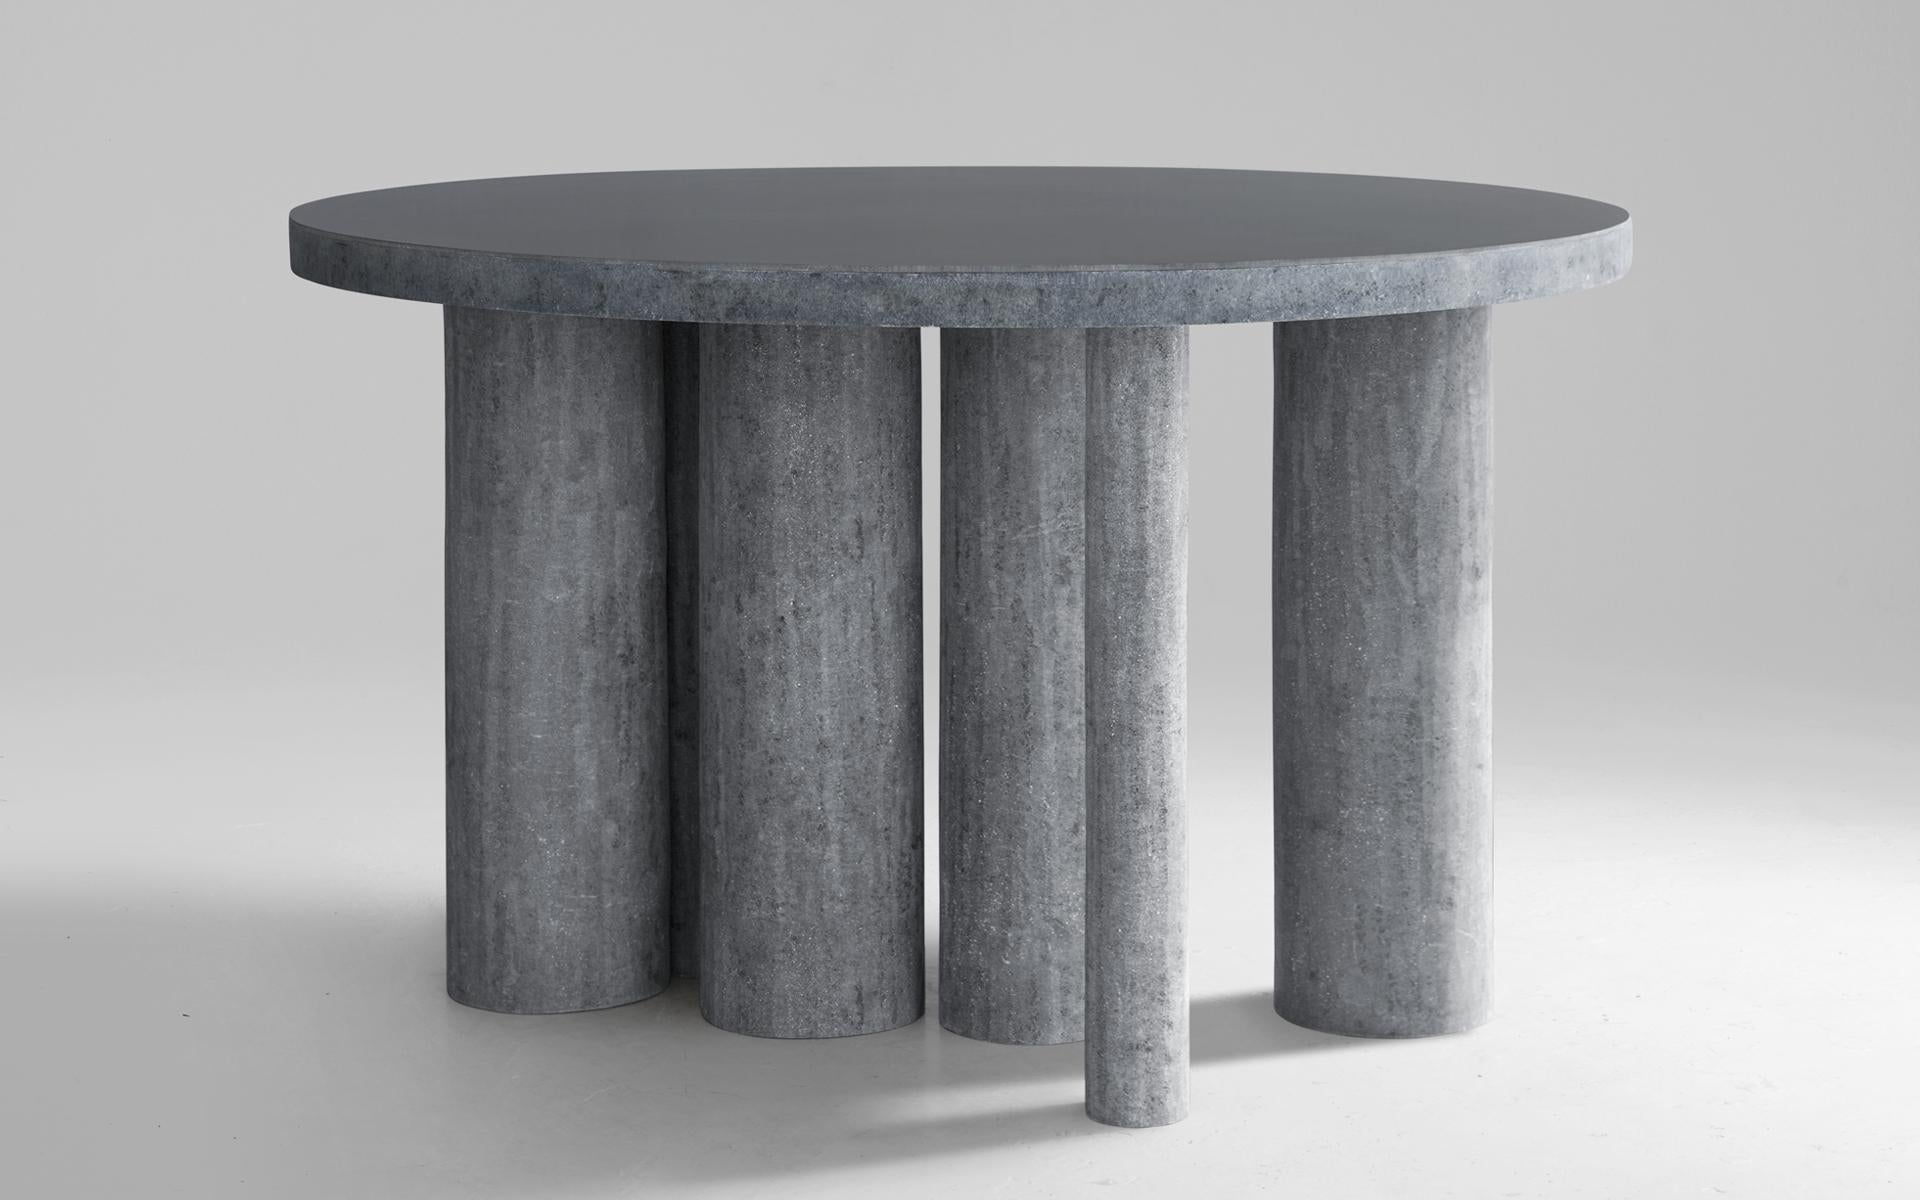 Òrghen table by Imperfettolab.
Dimensions: Ø 125 x H 74 cm.
Materials: raw material.

Imperfetto Lab
Who we are ? We are a family.
Verter Turroni, Emanuela Ravelli and our children Elia, Margherita and Eusebio.
All together, we are separate